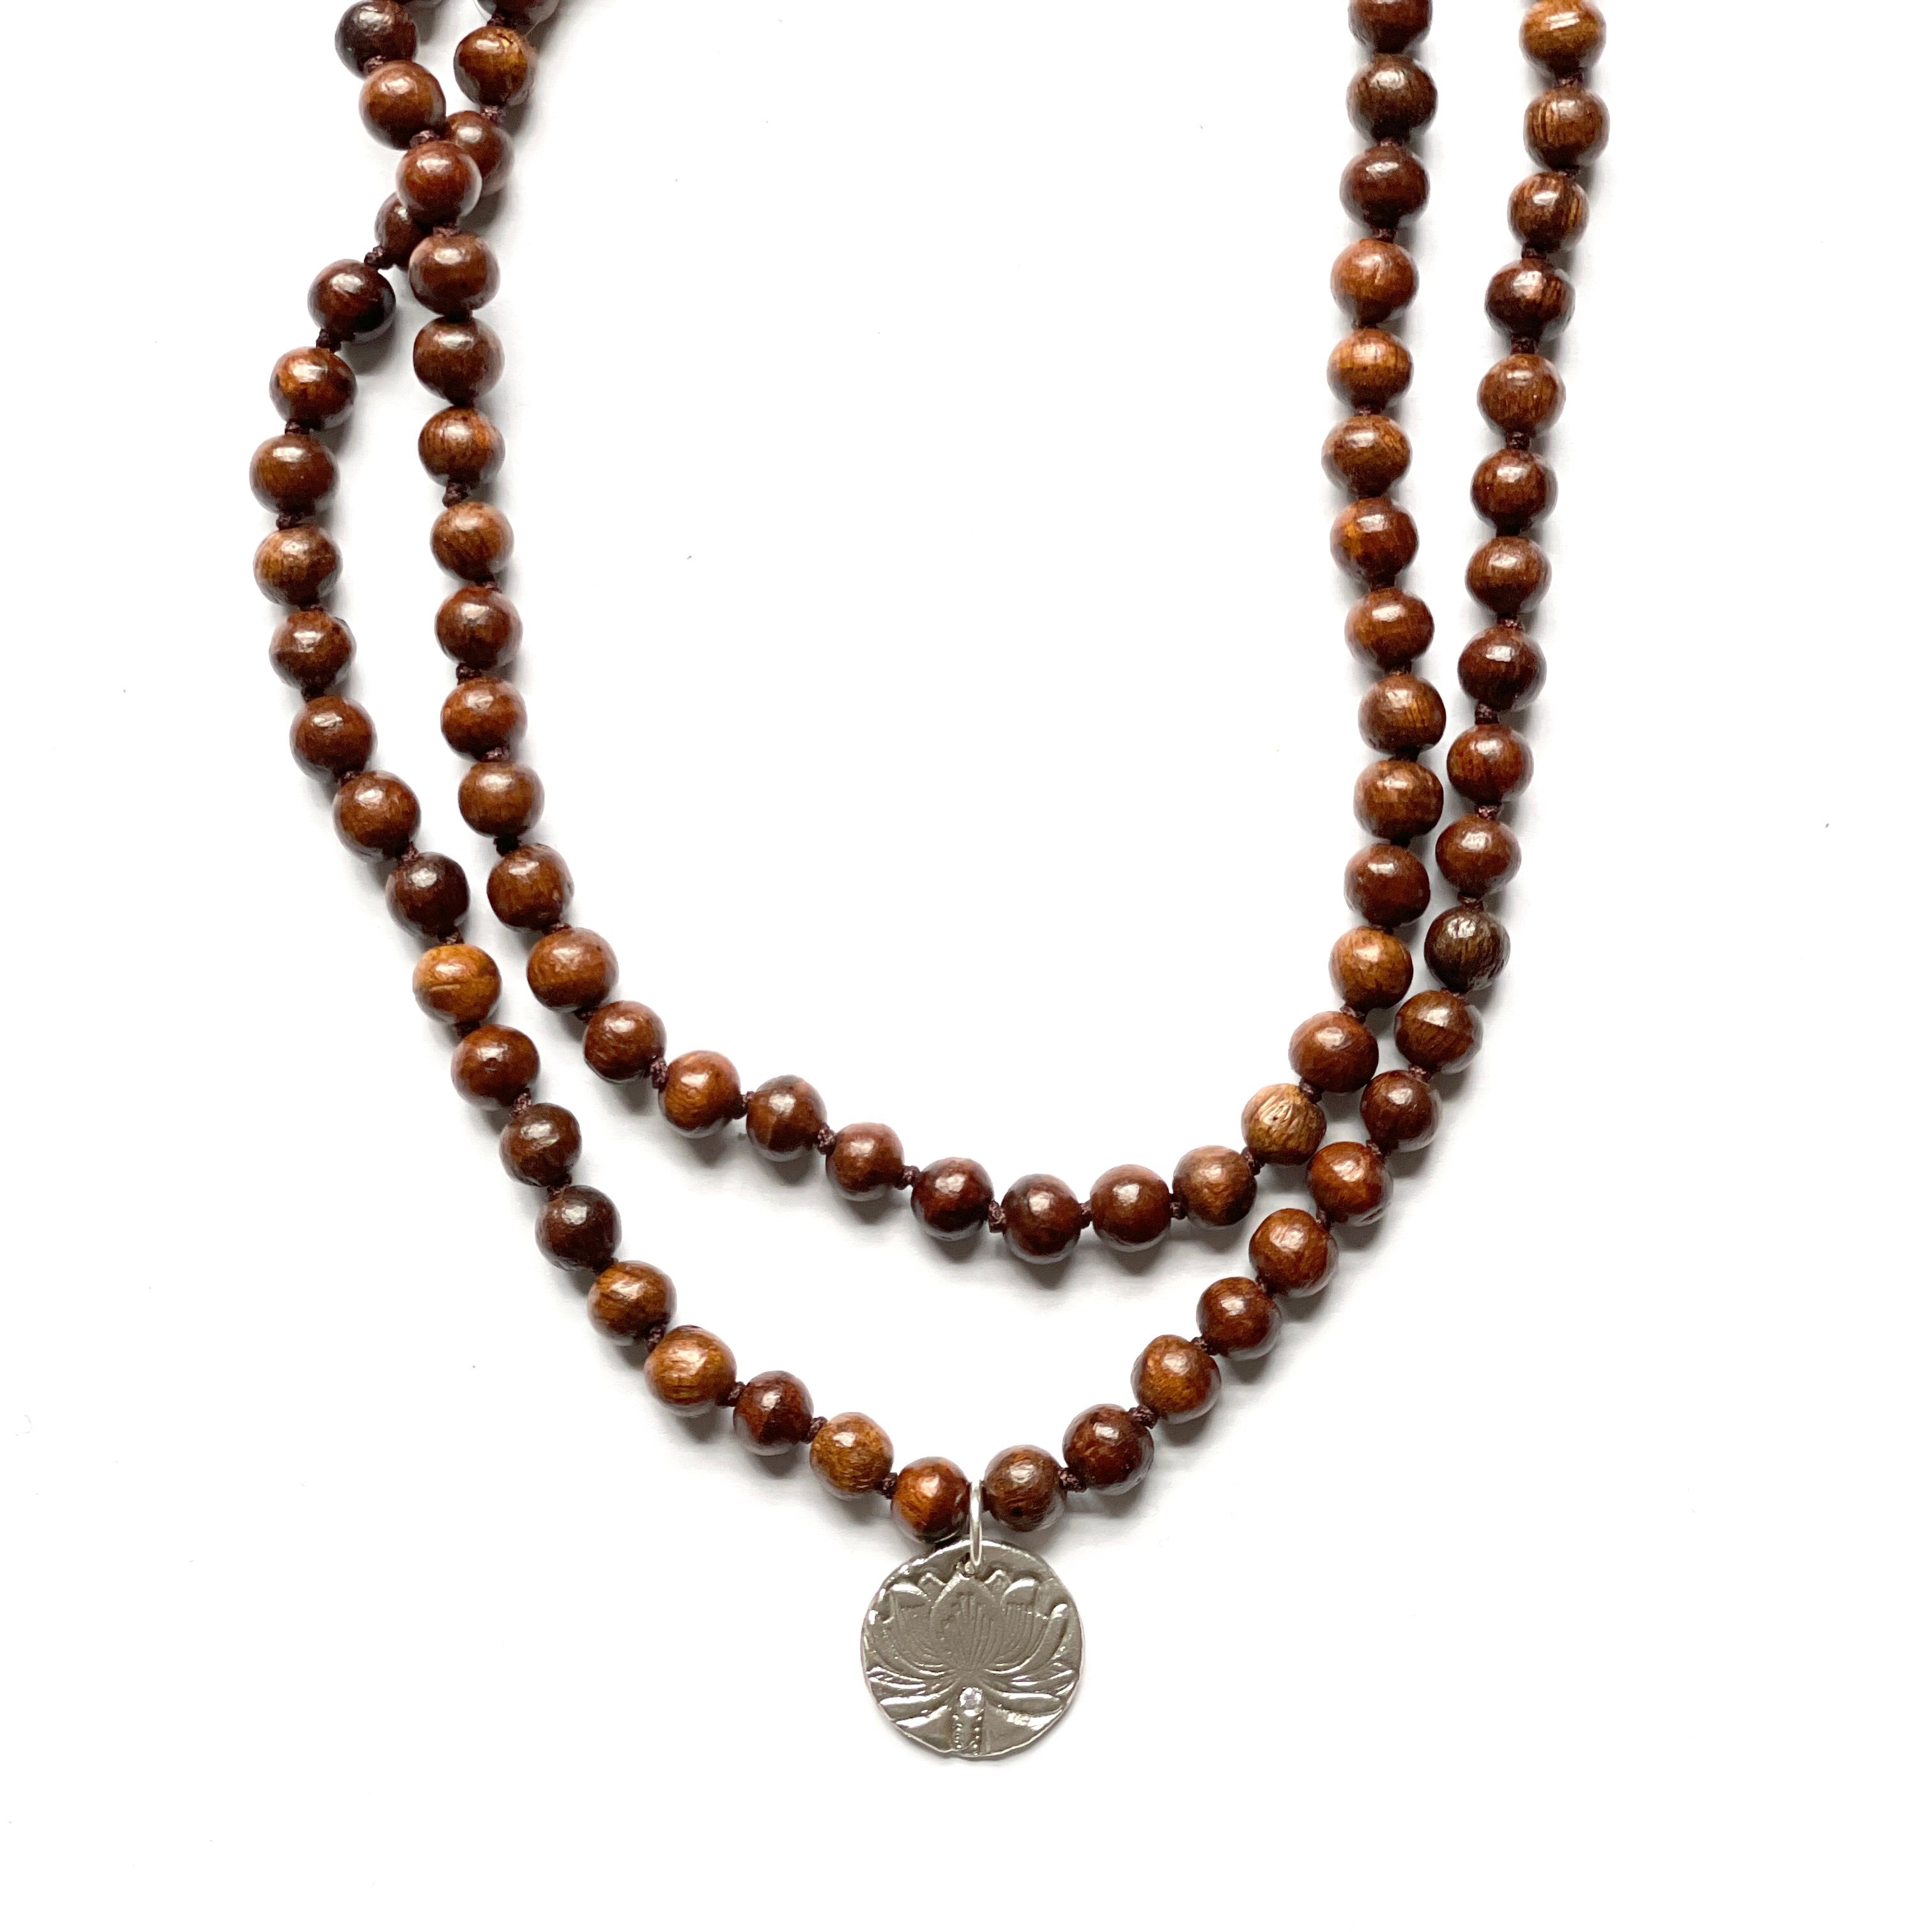 Brown Wood Bead Necklace Lotus Flower Charm Silver